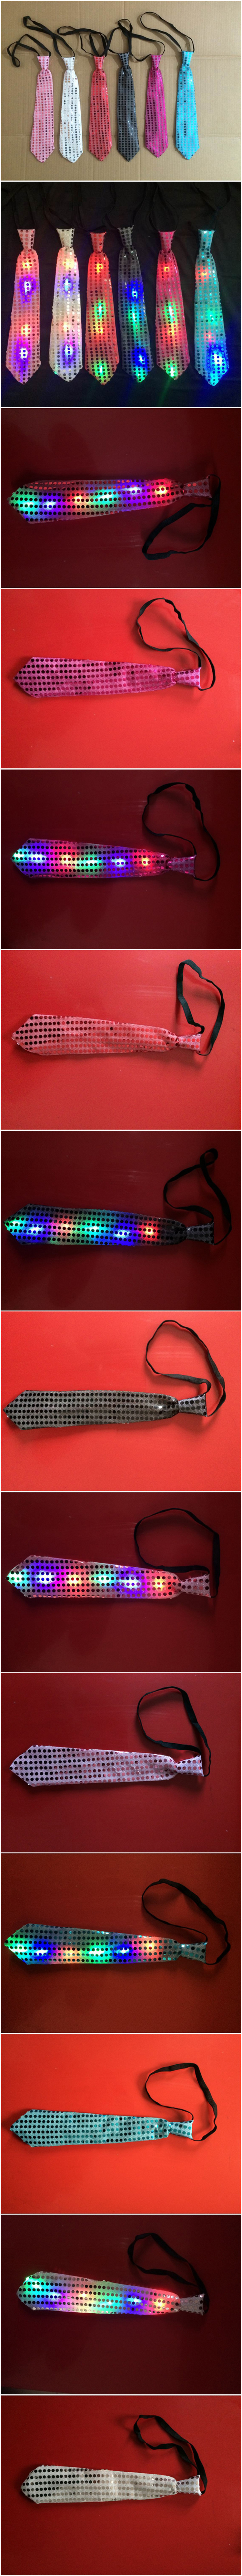 Fashion LED Glowing Tie Dance Party Bar Stage Glowing Flashing Tie Prop